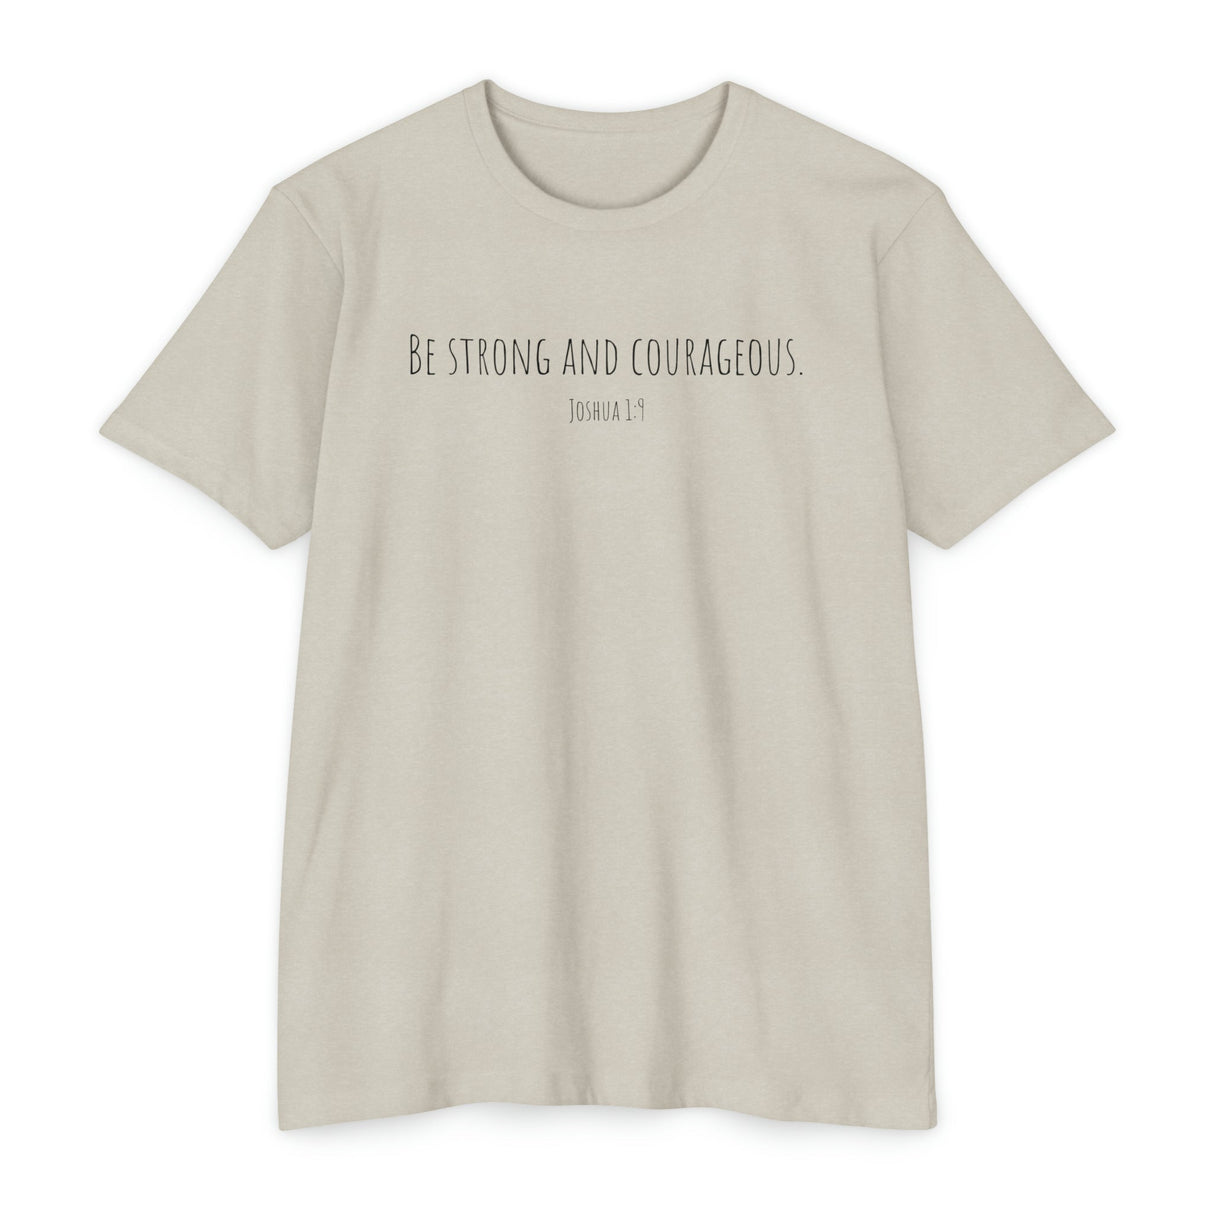 Chalklife - Joshua 1:9 - "Be strong and courageous." - T-Shirt - Chalklife, LLC